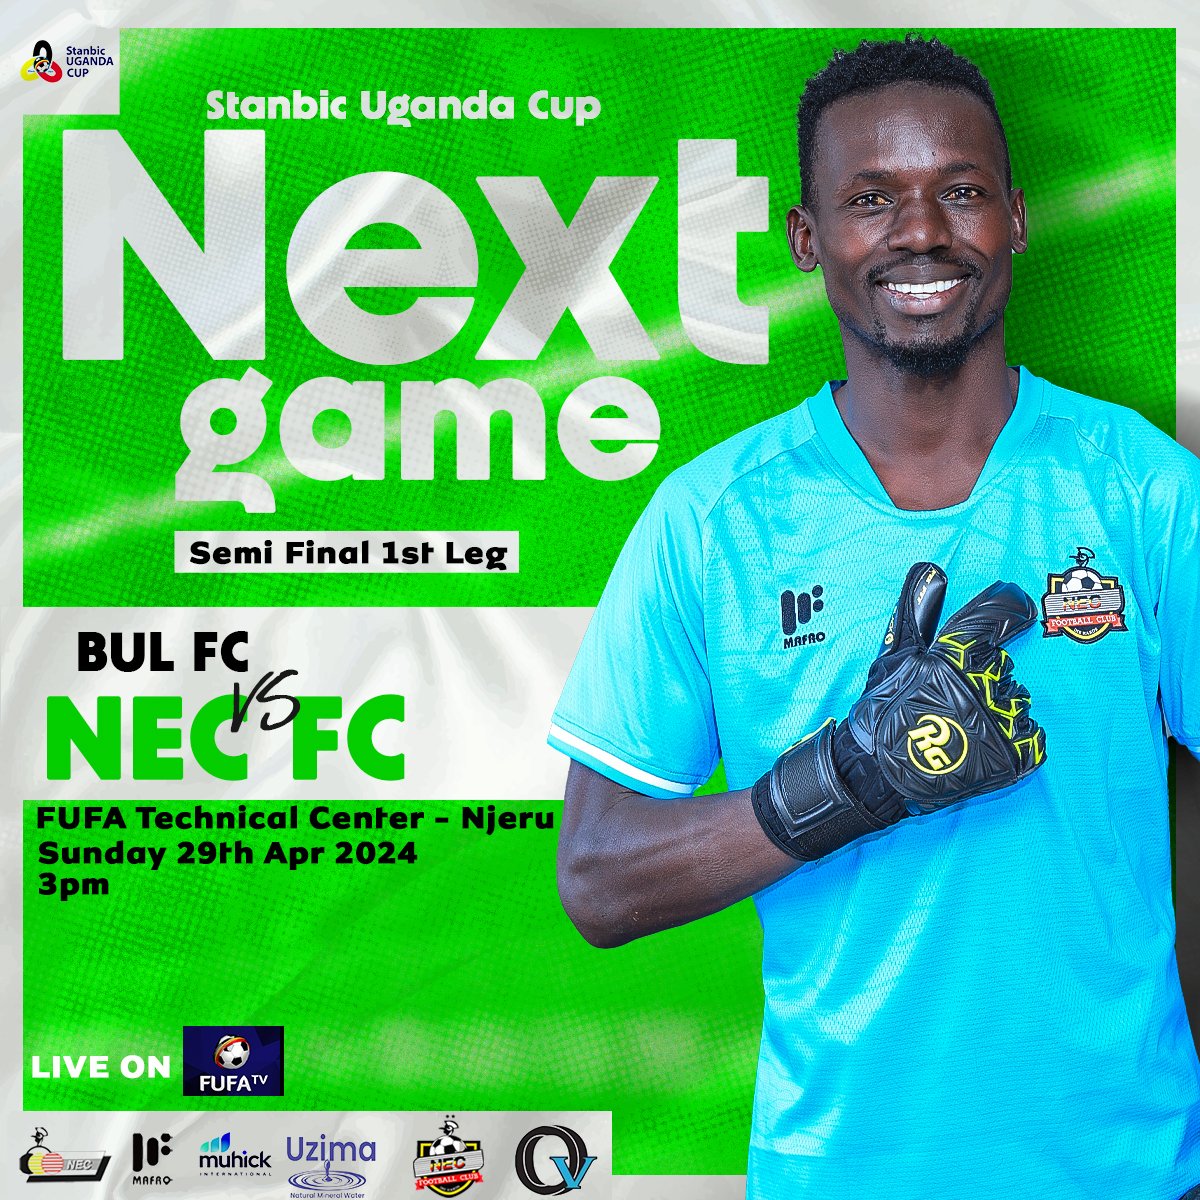 Here we are going @stanbicUgandaCup as they have just met in @UPL en NEC fc took over Should we expect a revange(?) #BulFc_vsNEC fc Abbey Kikomeko Bogere vs tactical Hussein Mbalangu at FUFA Technical center Njeru